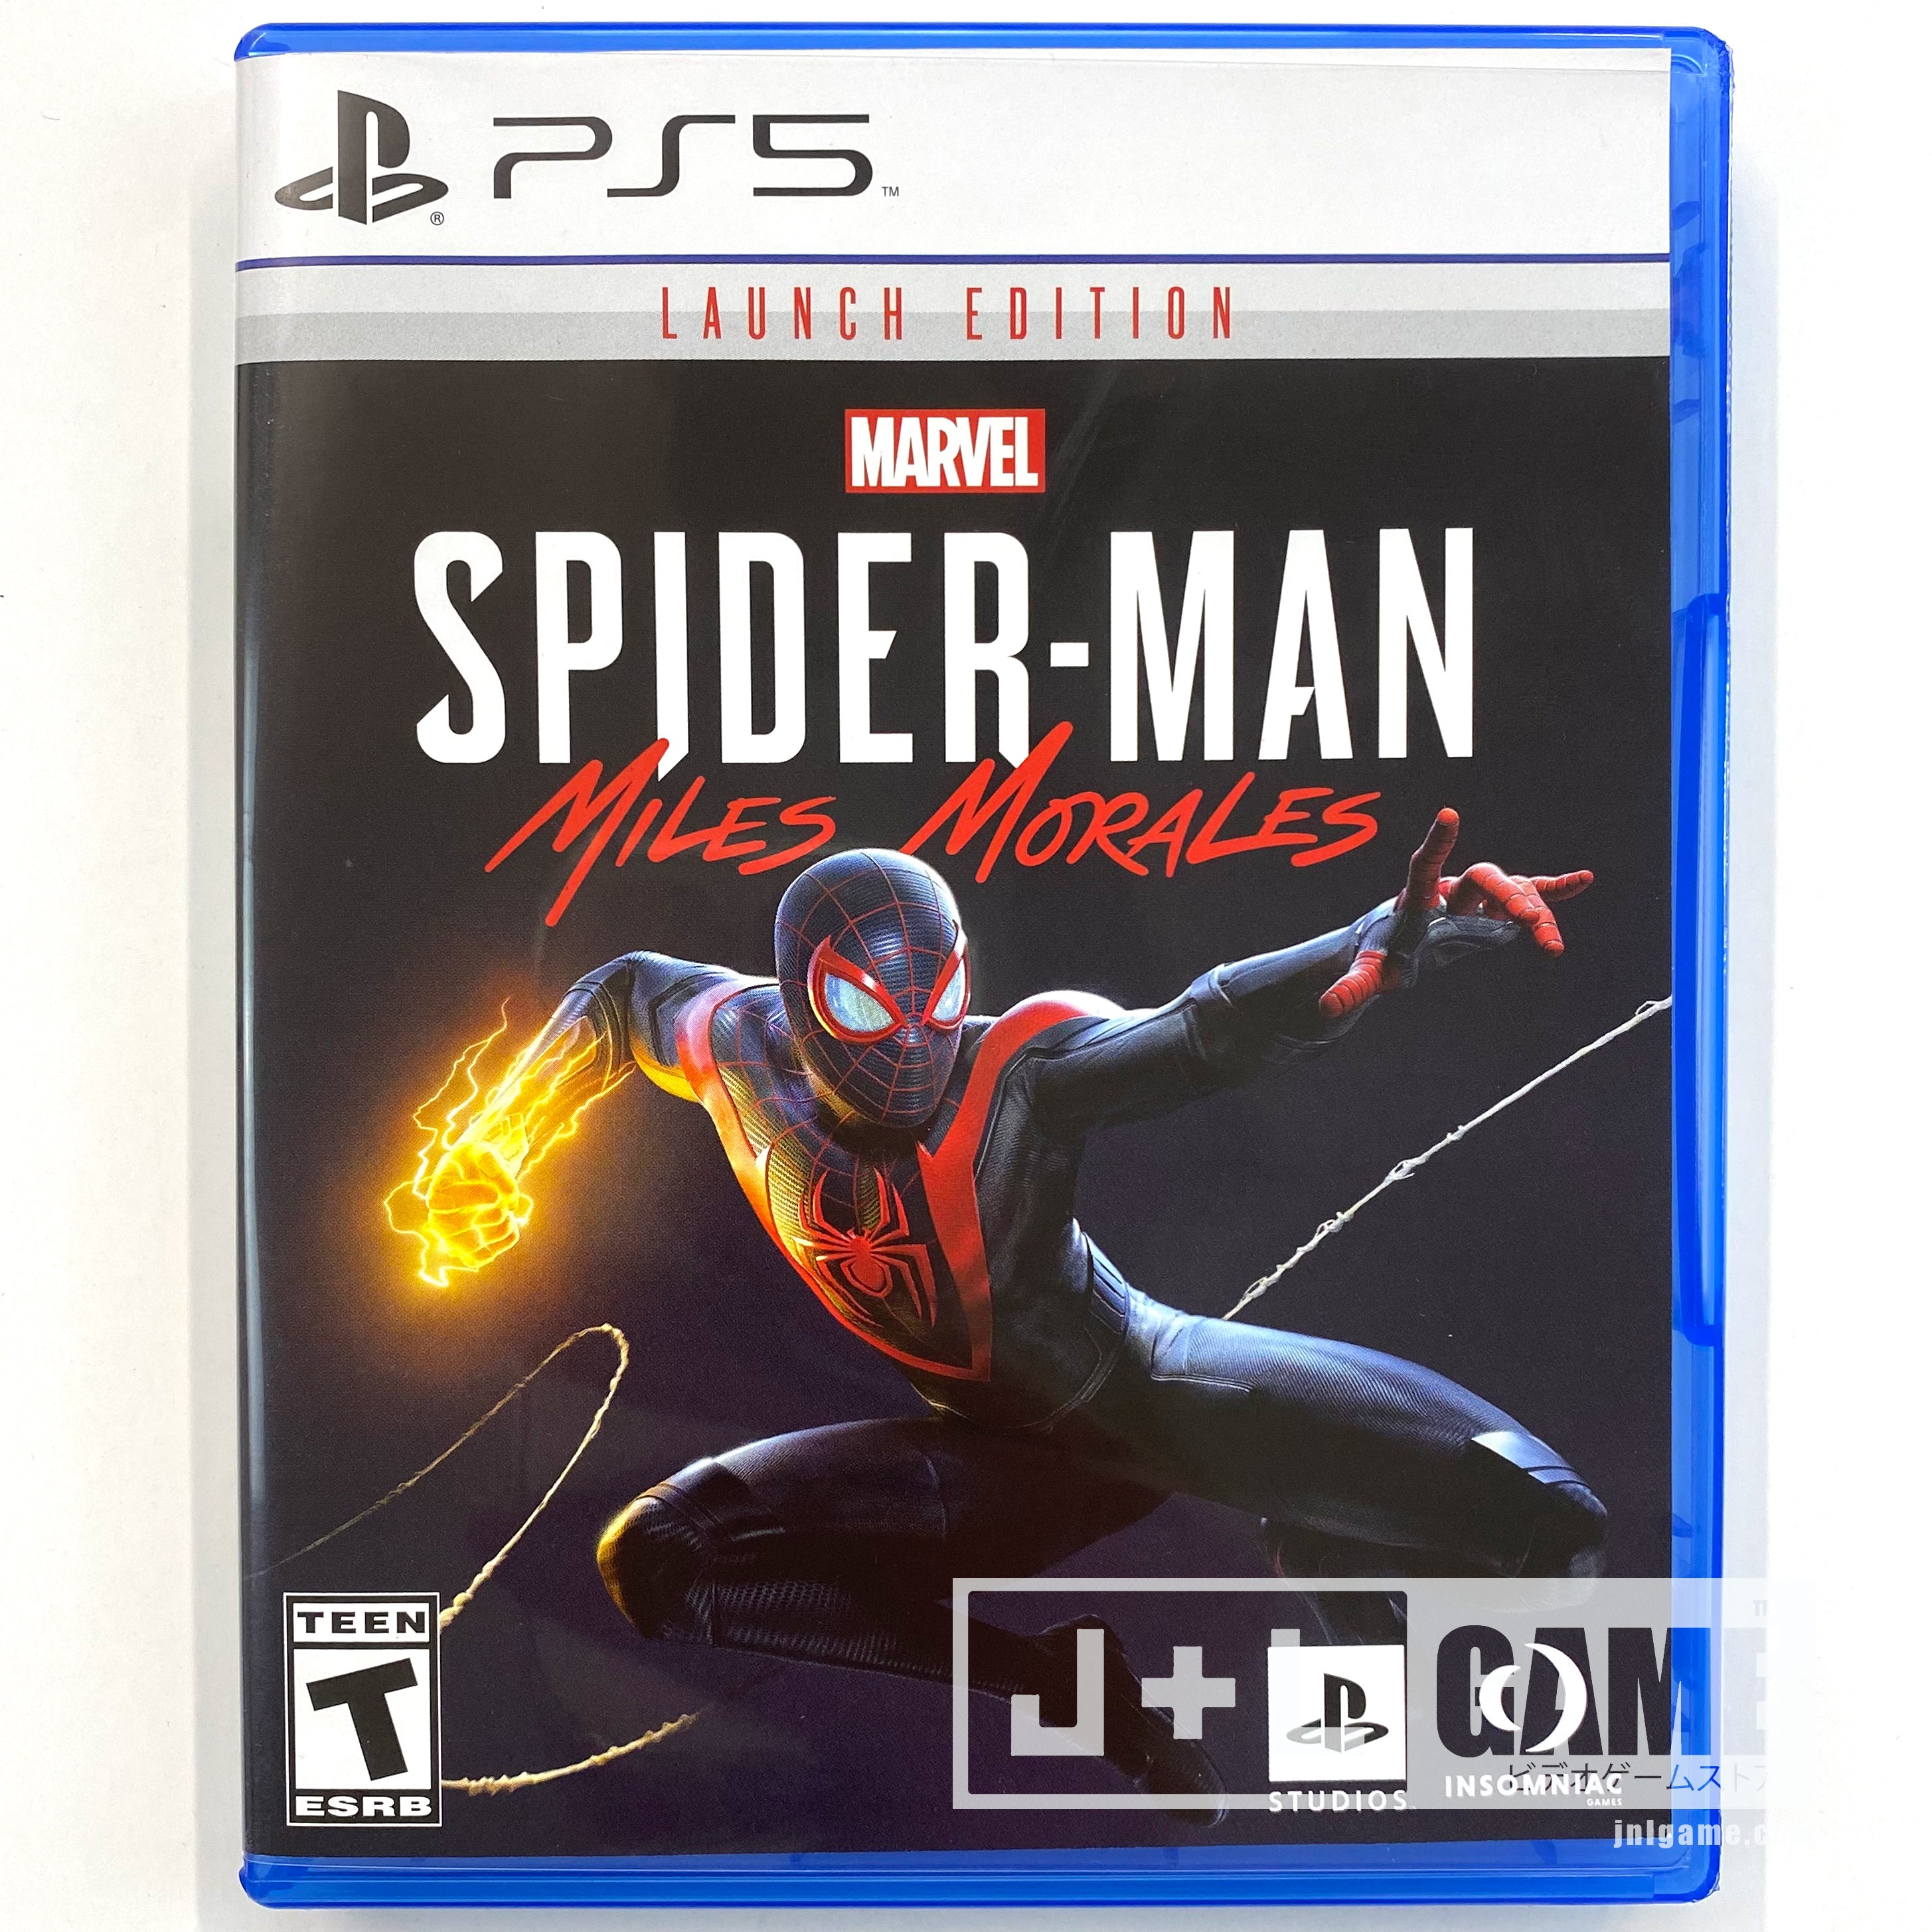 Marvel’s Spider-Man: Miles Morales Launch Edition - (PS5) PlayStation 5 [UNBOXING] Video Games PlayStation   